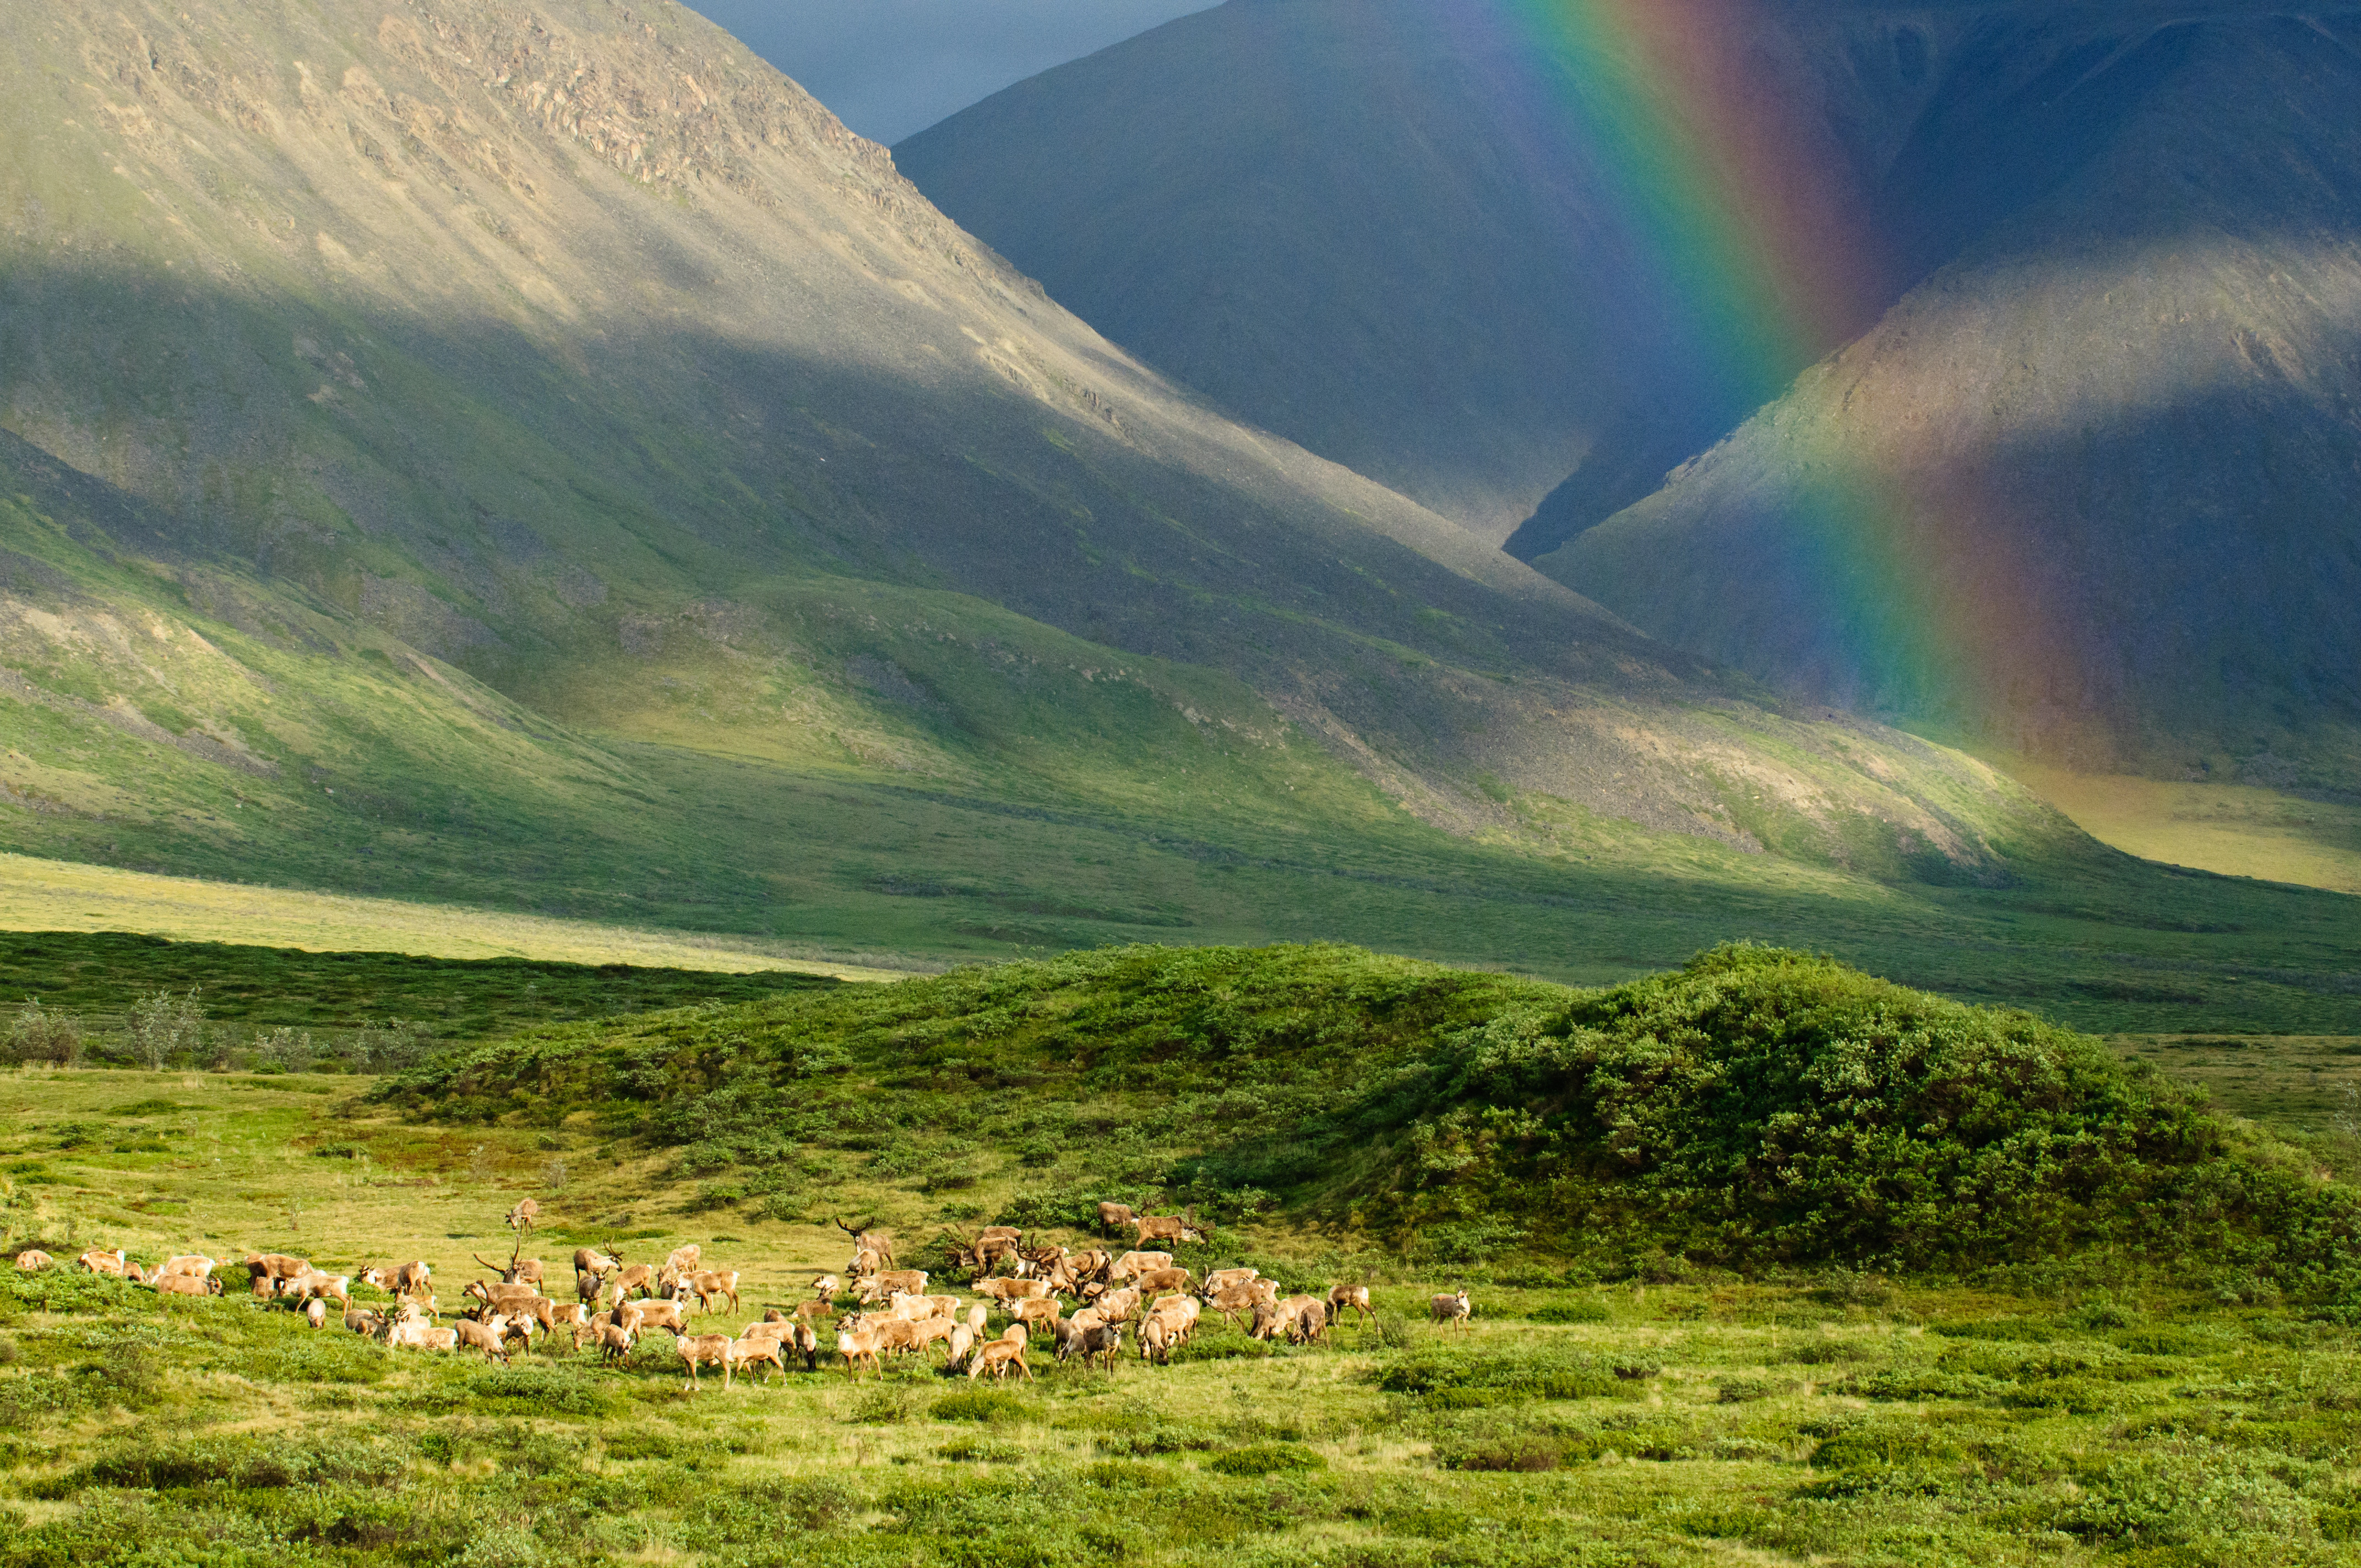 Members of the Porcupine Caribou Herd enter the mountain valleys in the Arctic Refuge, where they find lush vegetation. Caribou are constantly feeding even while migration in order to gain enough weight for the meager winter months. Arctic Refuge, Brooks Range, Alaska